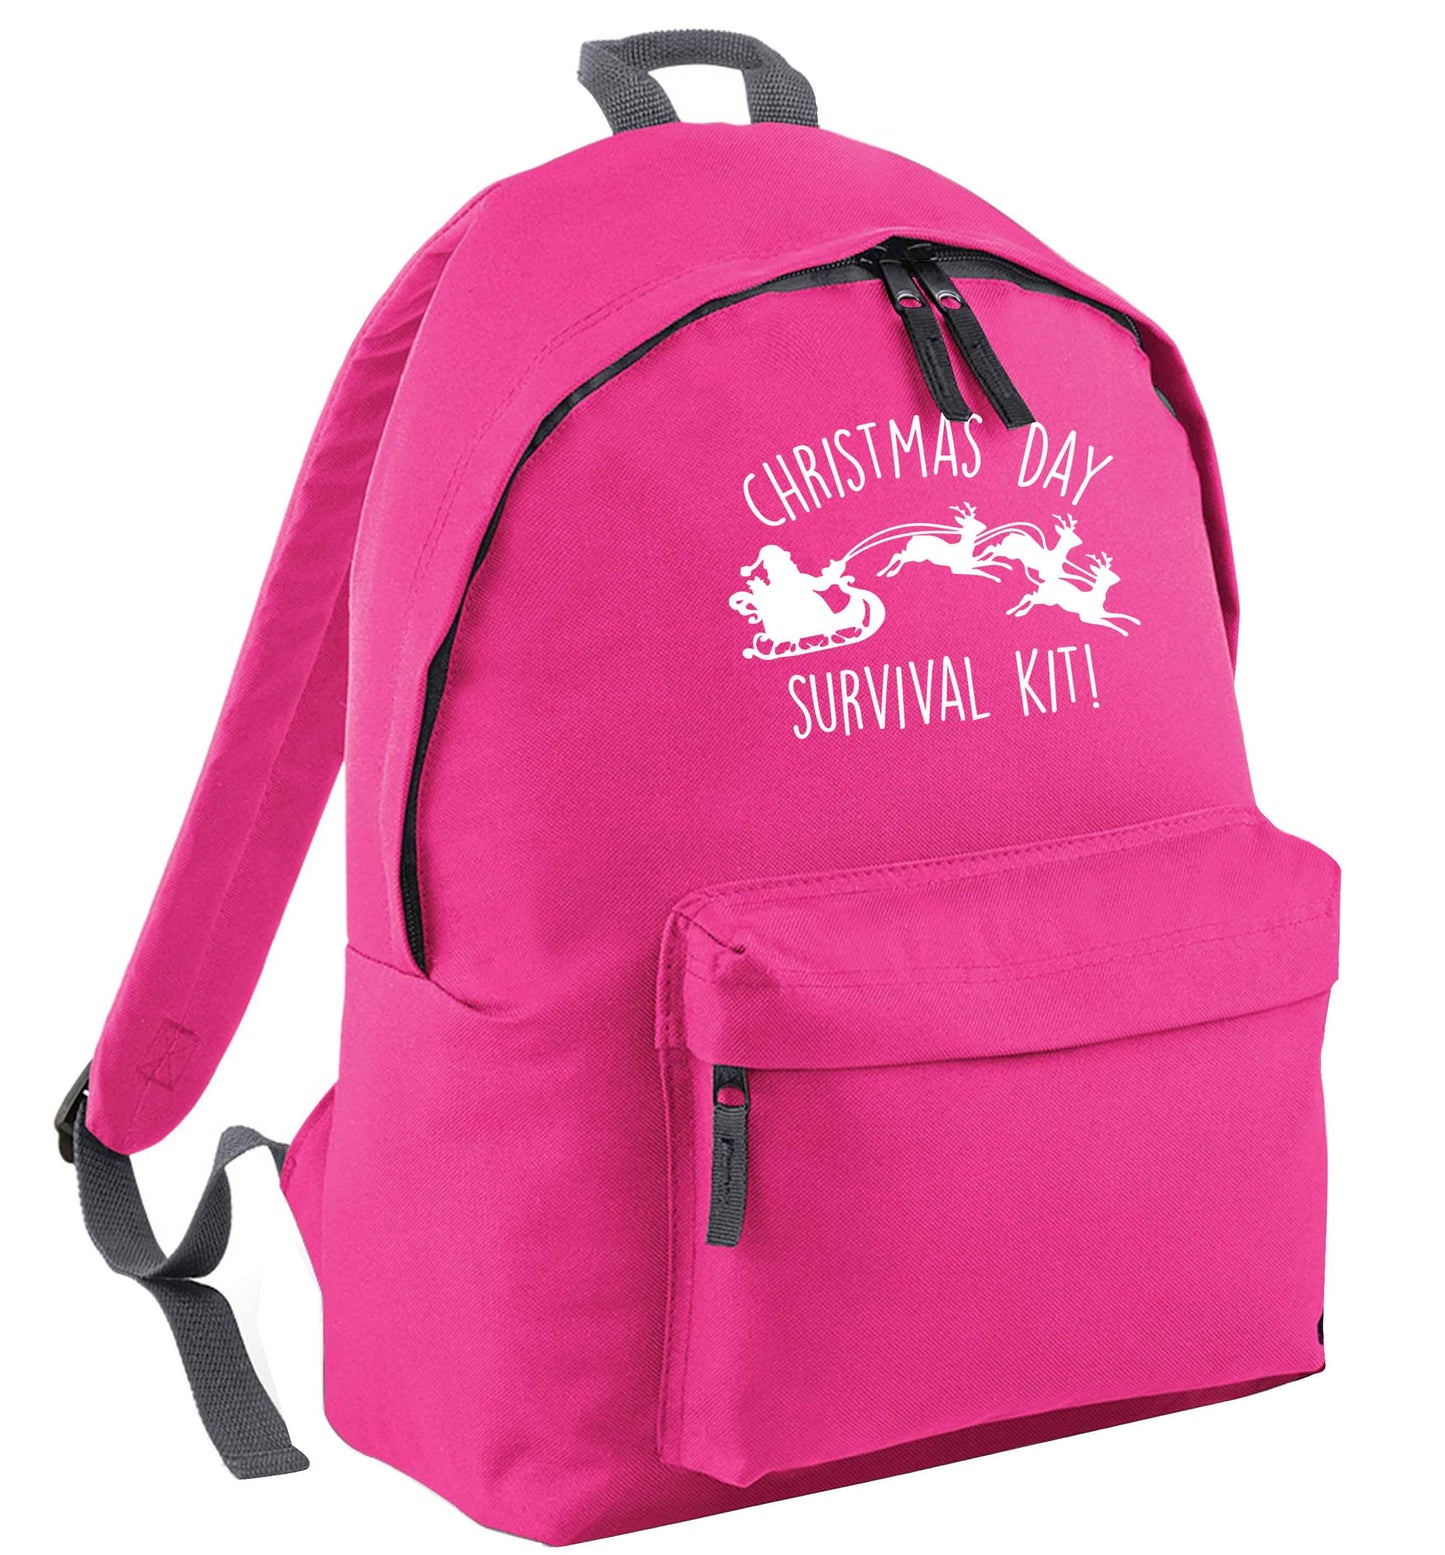 Christmas Day Survival Kitpink adults backpack